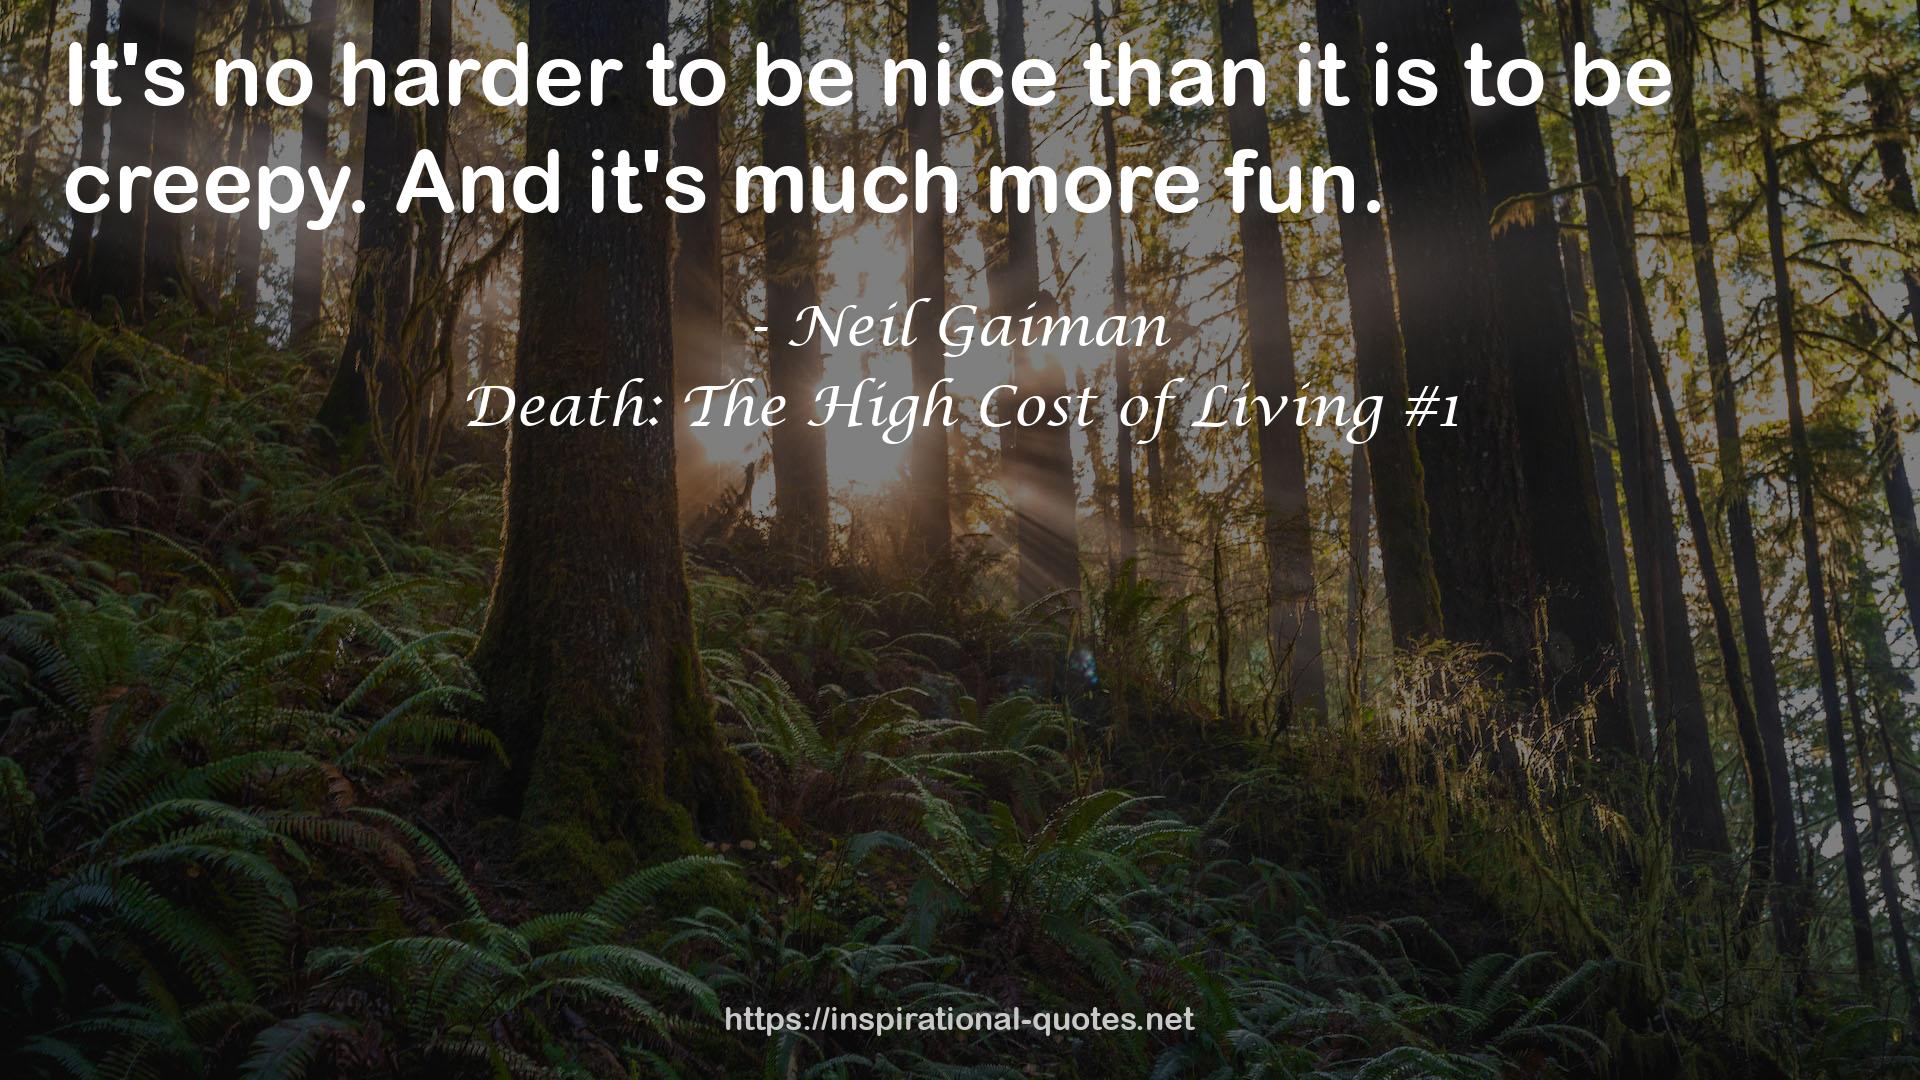 Death: The High Cost of Living #1 QUOTES